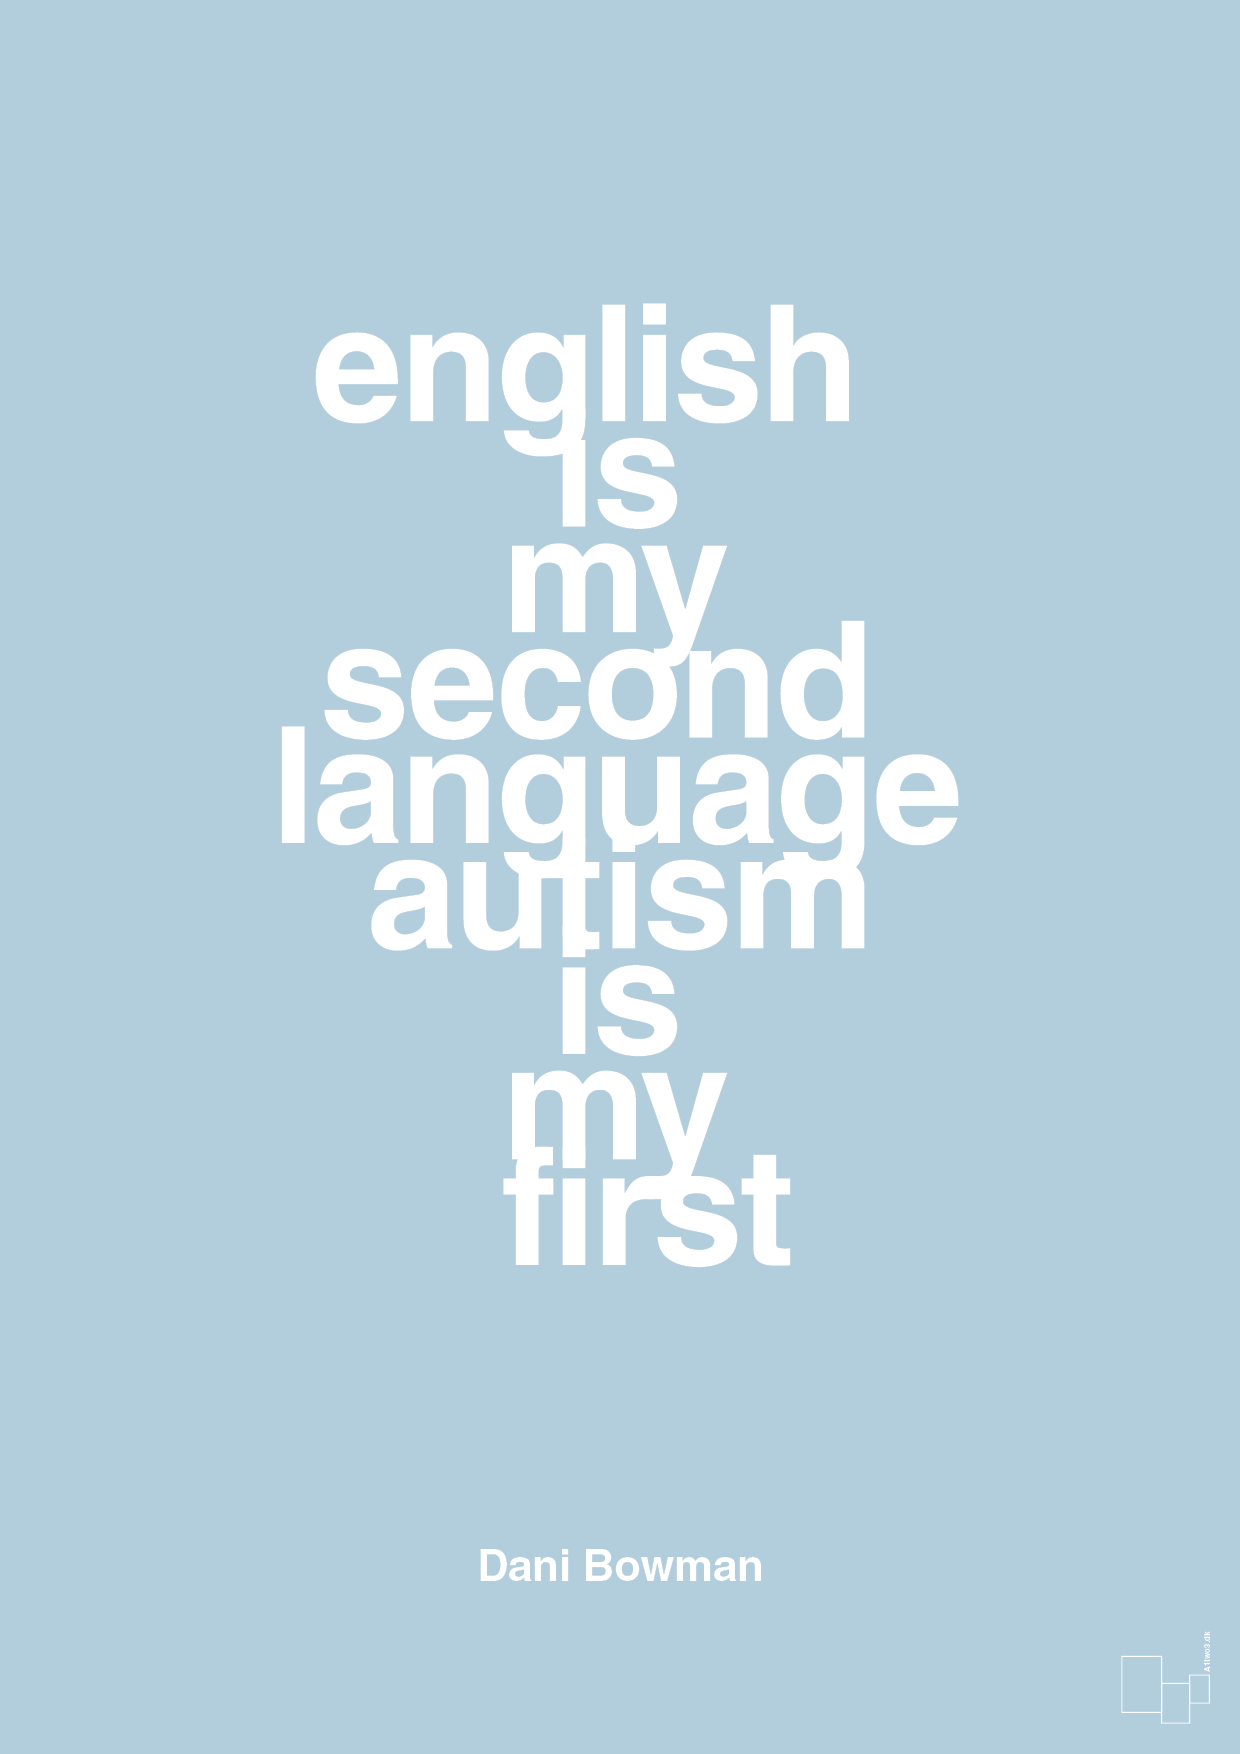 english is my second language autism is my first - Plakat med Samfund i Heavenly Blue